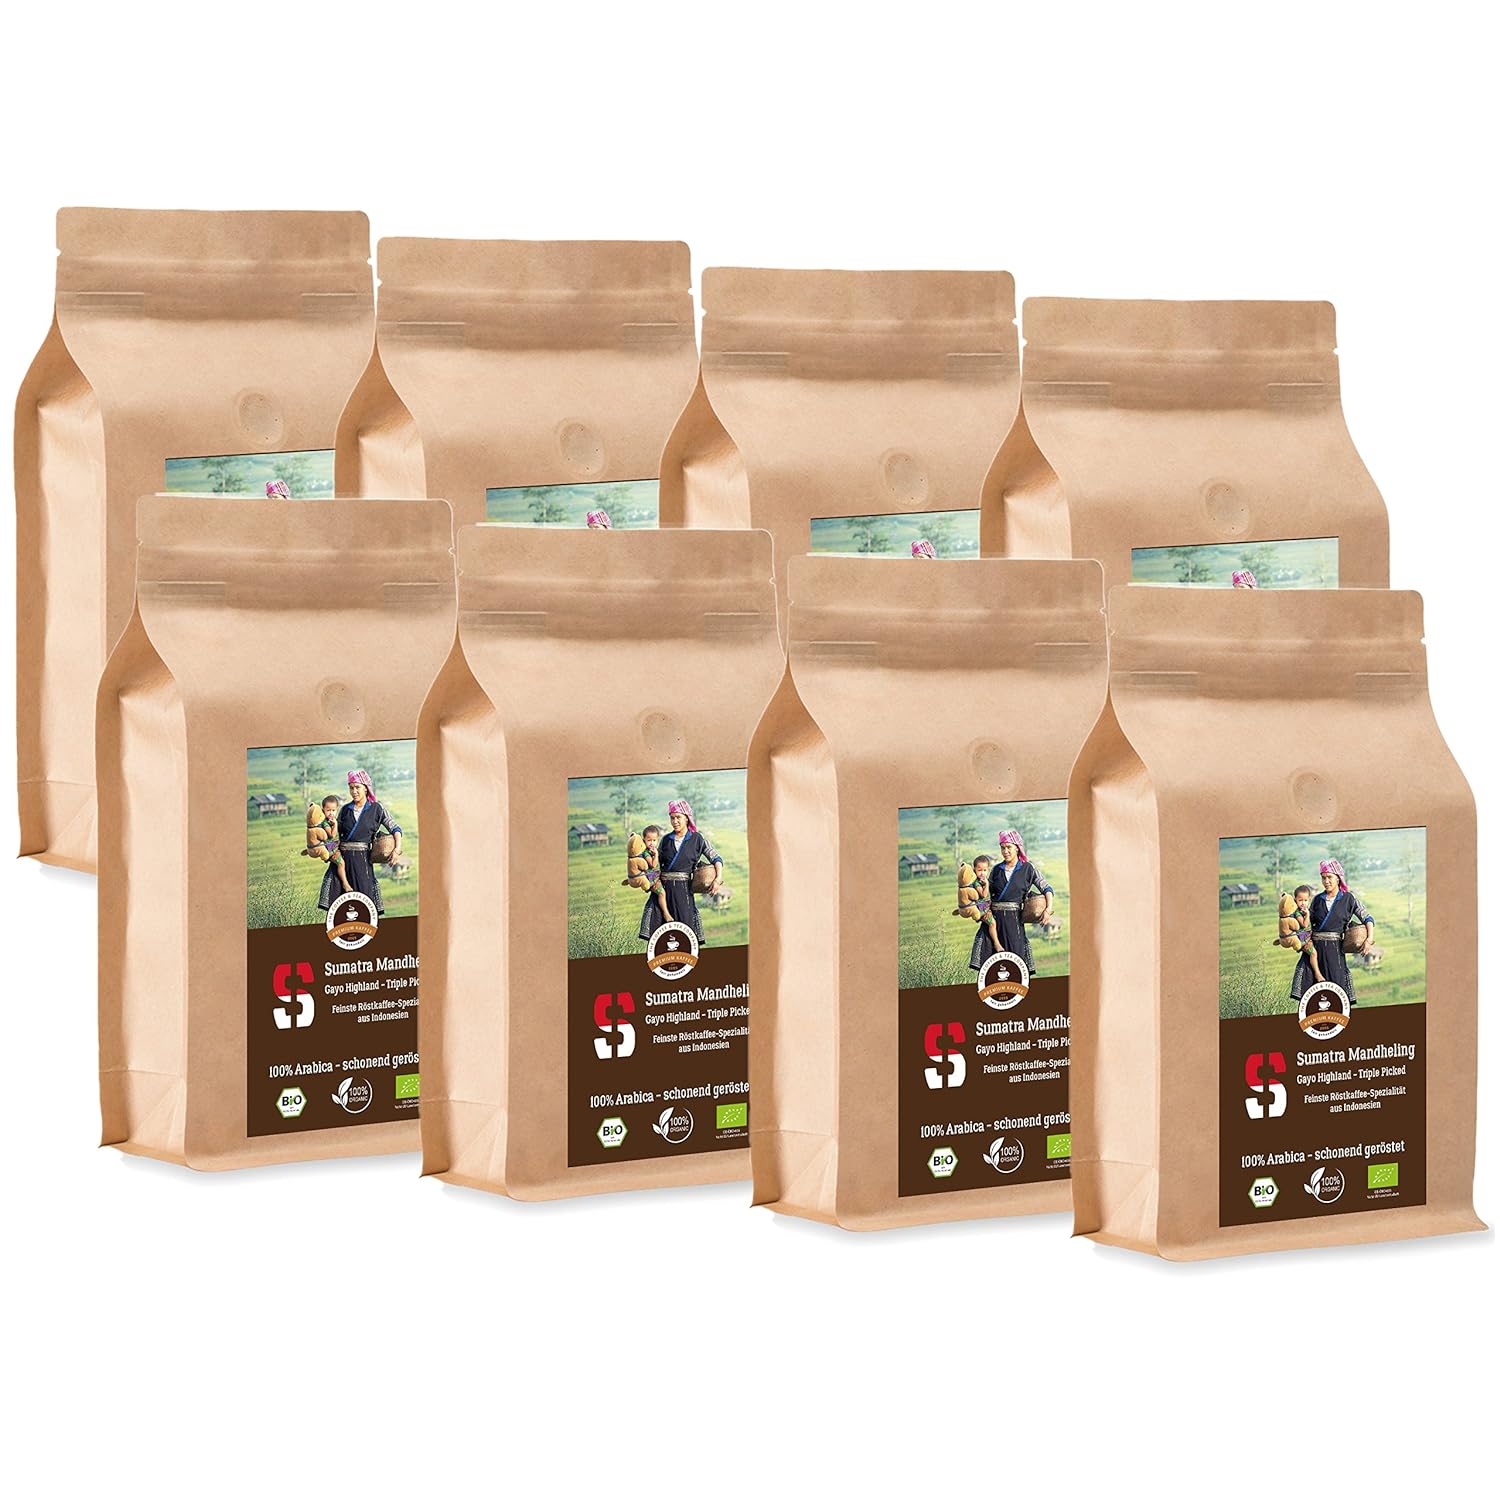 Coffee Globetrotter - Sumatra Mandheling Gayo Highland - Organic - 8 x 1000 g Very Fine Ground - for Fully Automatic Coffee Grinder - Roasted Coffee from Organic Cultivation | Gastropack Economy Pack